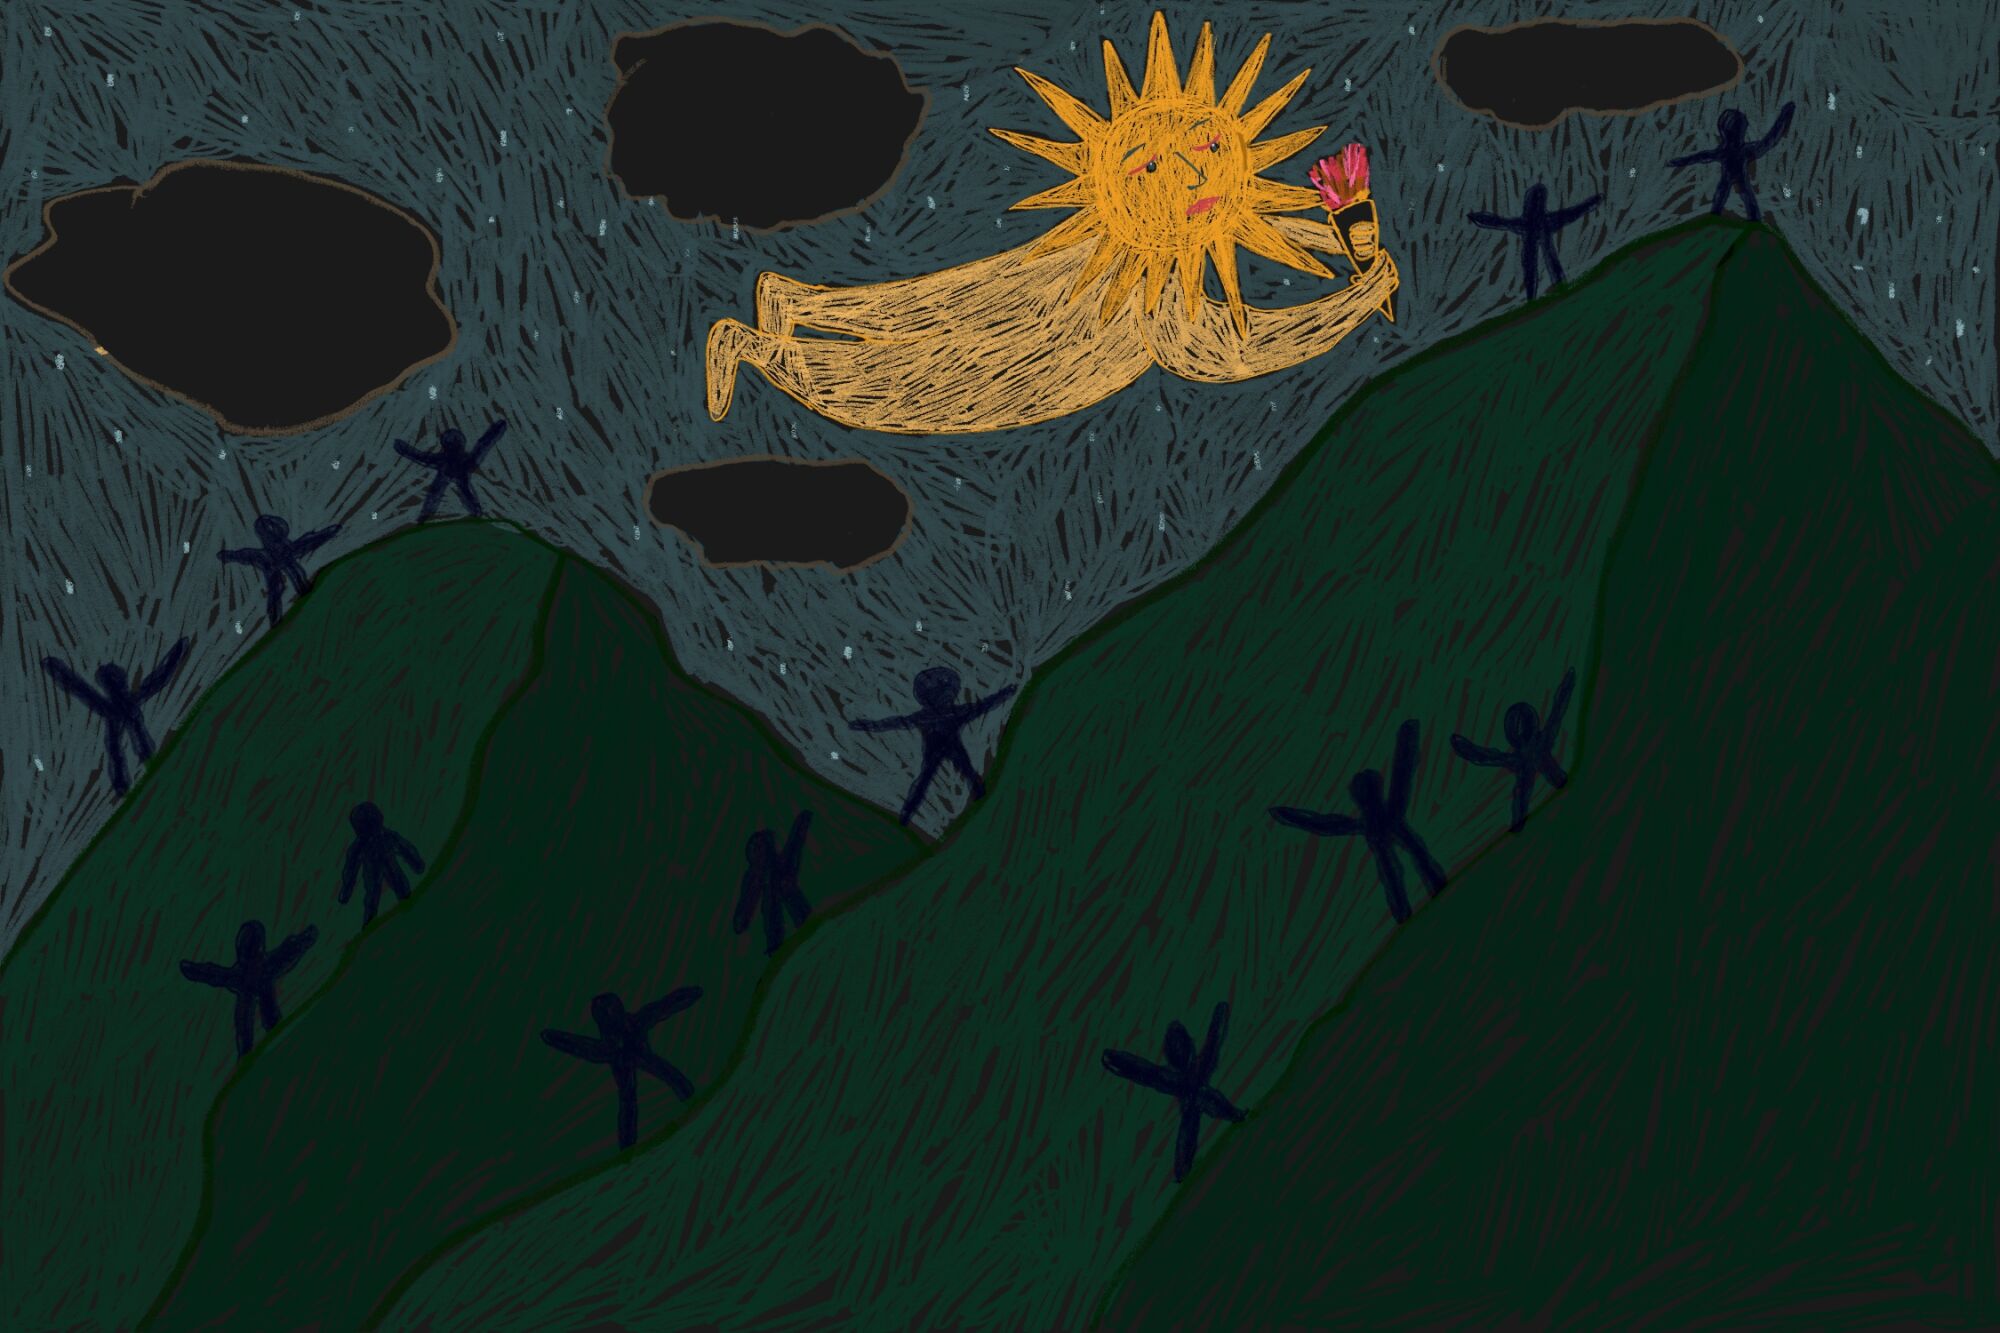 A drawing of Kakunupmawa with Chumash people hiking the sacred mountain and Old Man Sun carrying a torch through the sky